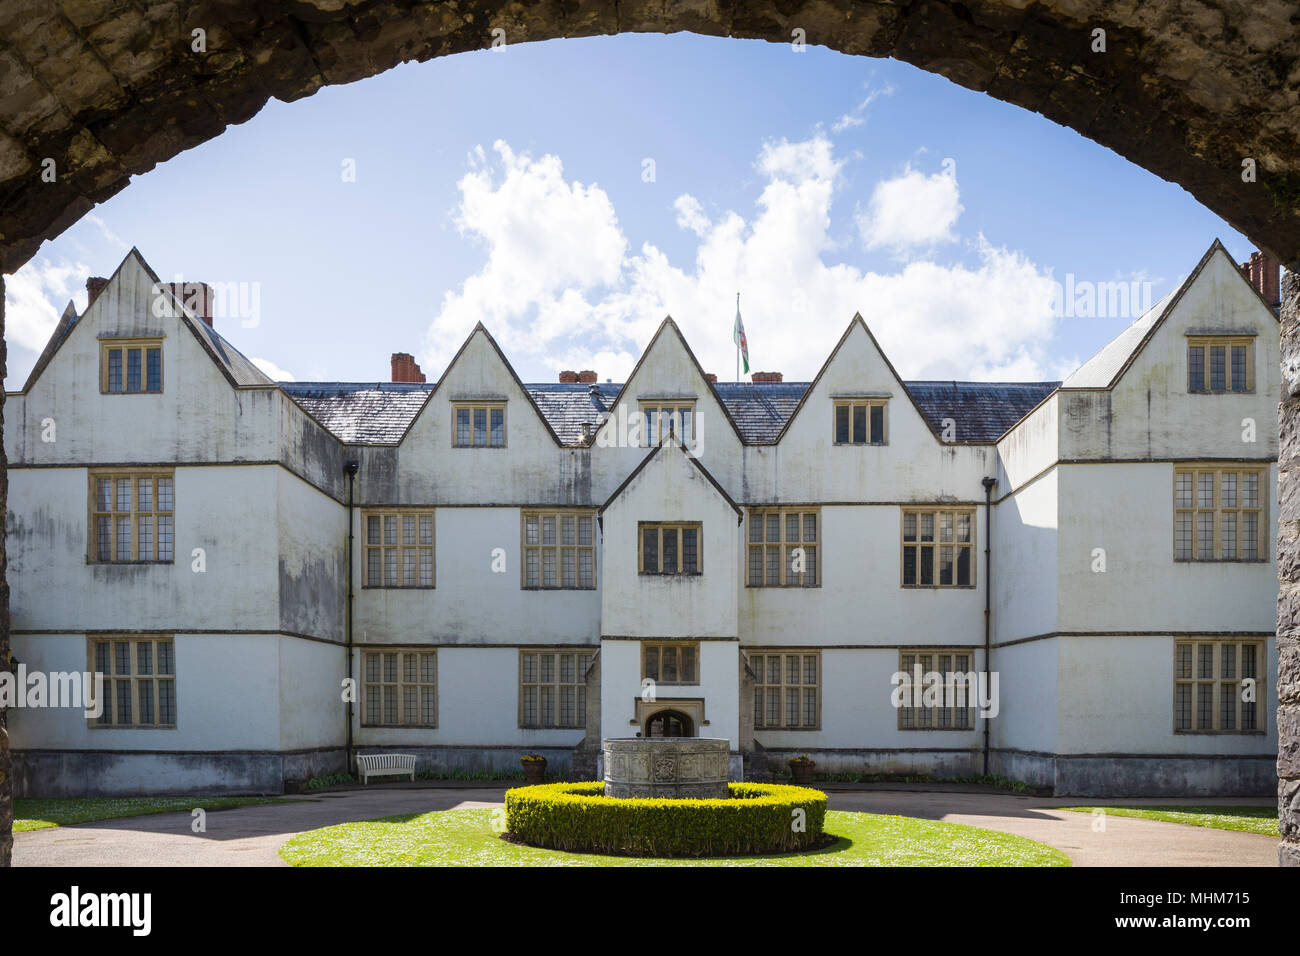 St Fagans Castle / Castell Sain Ffagan, an Elizabethan mansion near Cardiff, Wales, UK, part of St Fagans National Museum of History. Stock Photo